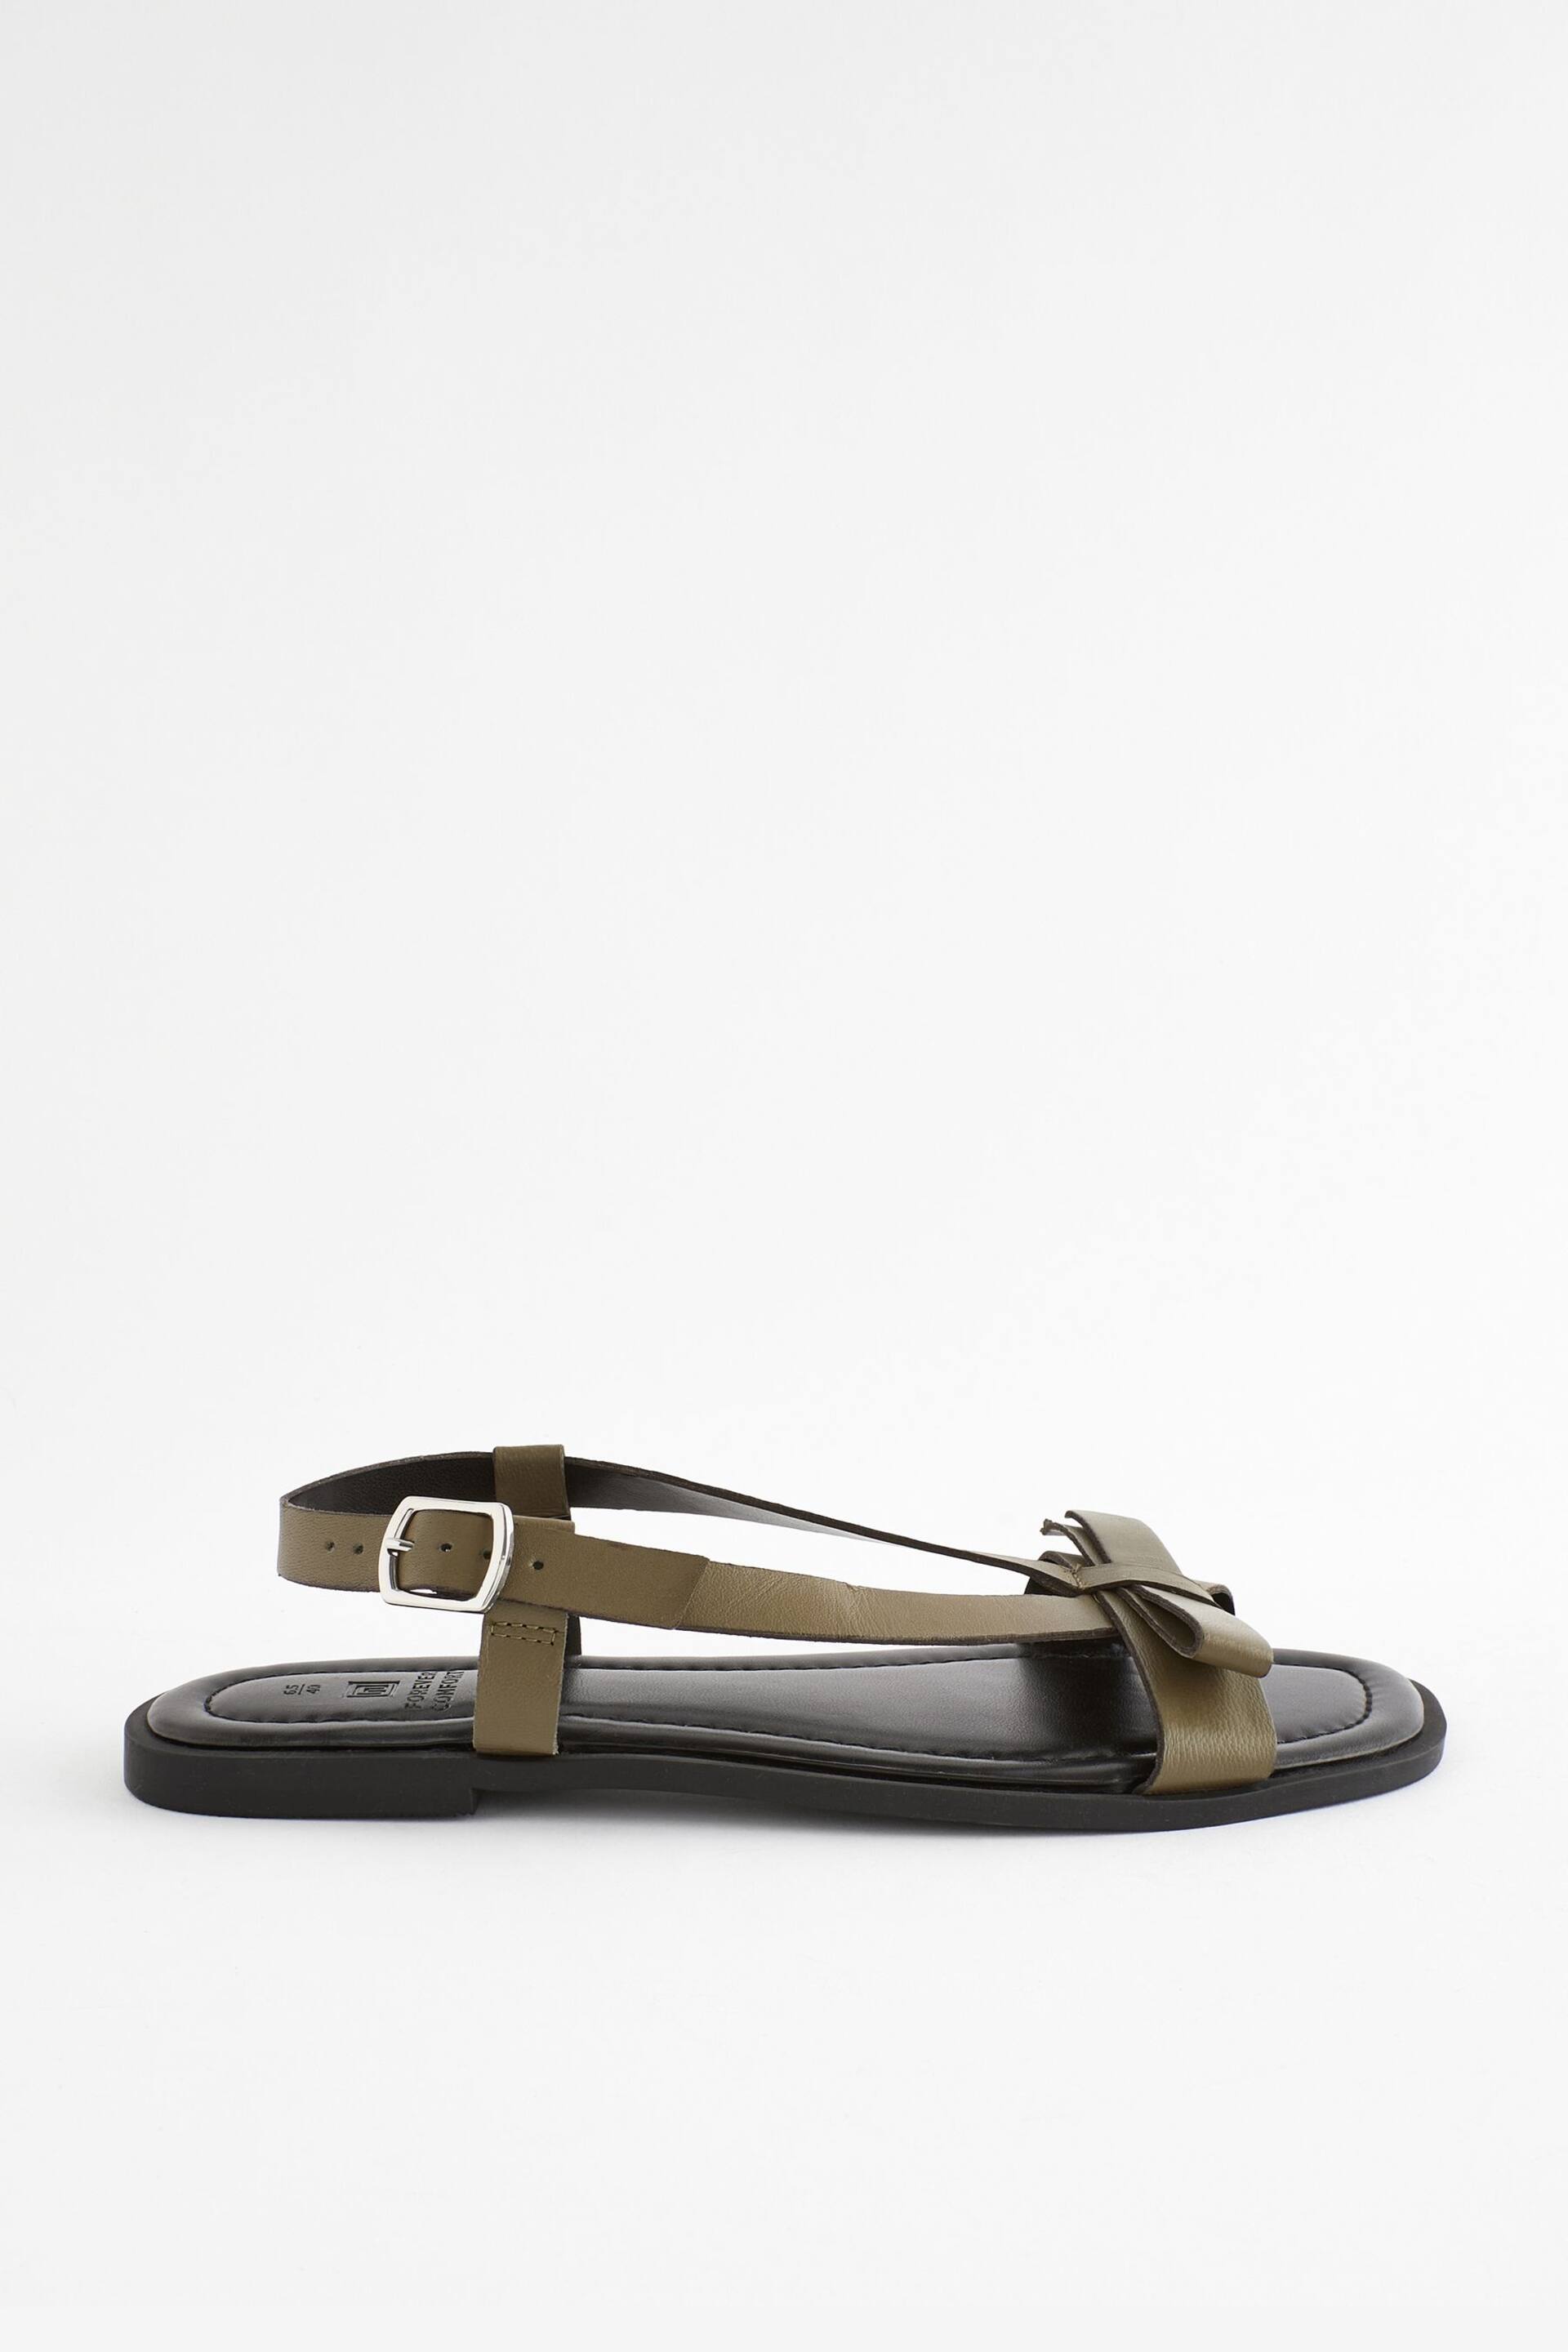 Khaki Green Regular/Wide Fit Forever Comfort ® Leather Bow Sandals - Image 4 of 8